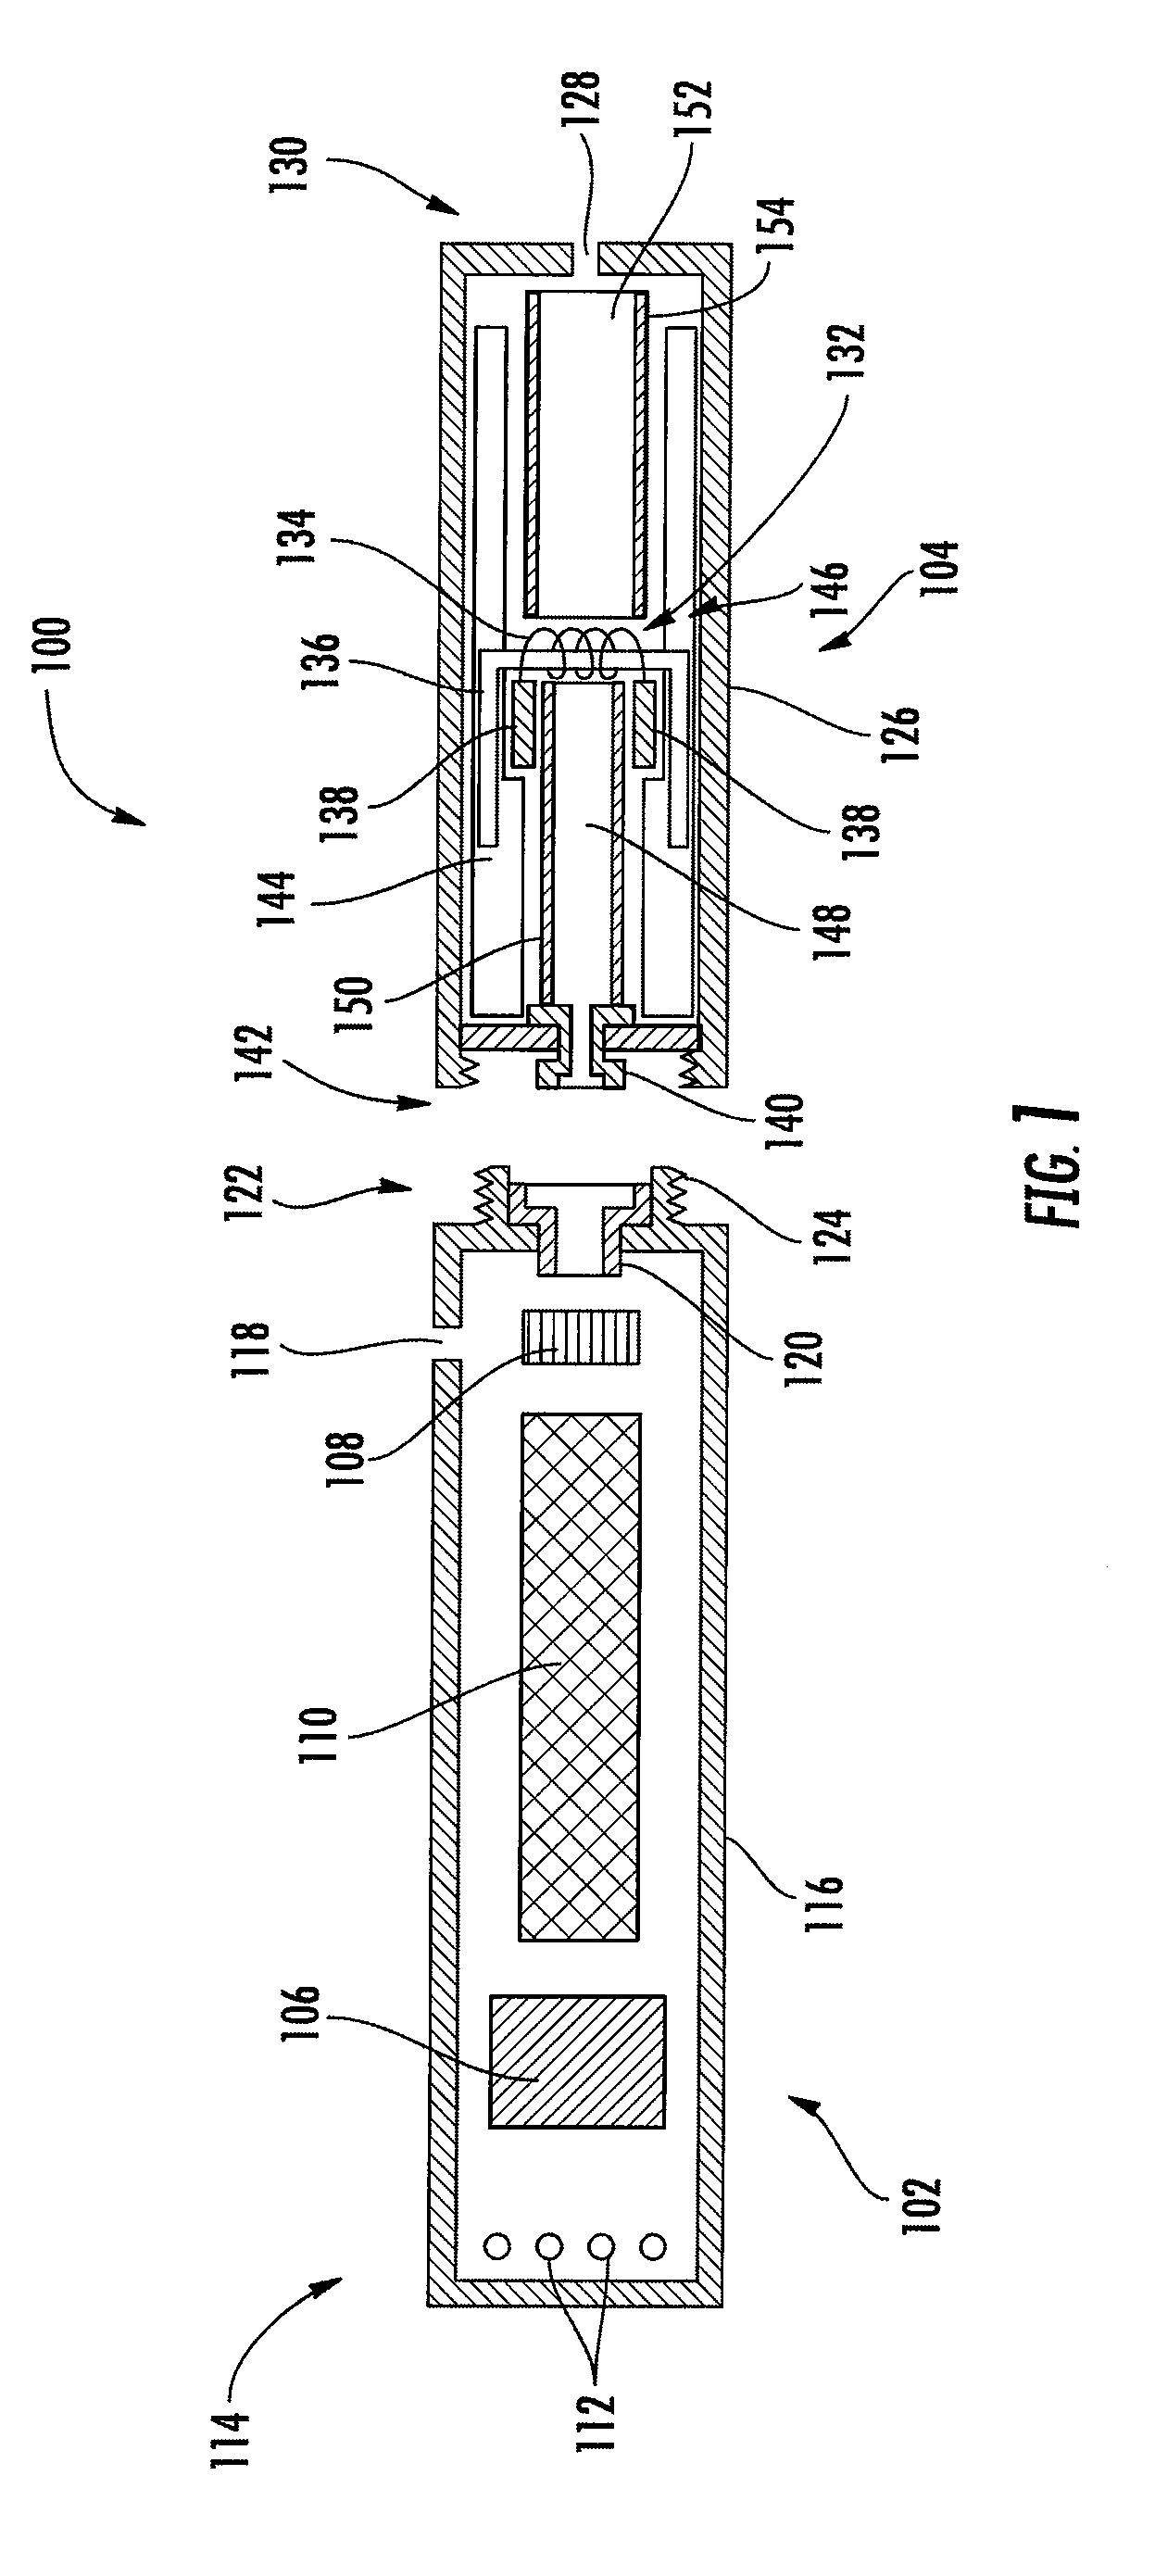 Aerosol Delivery Device With an Illuminated Outer Surface and Related Method